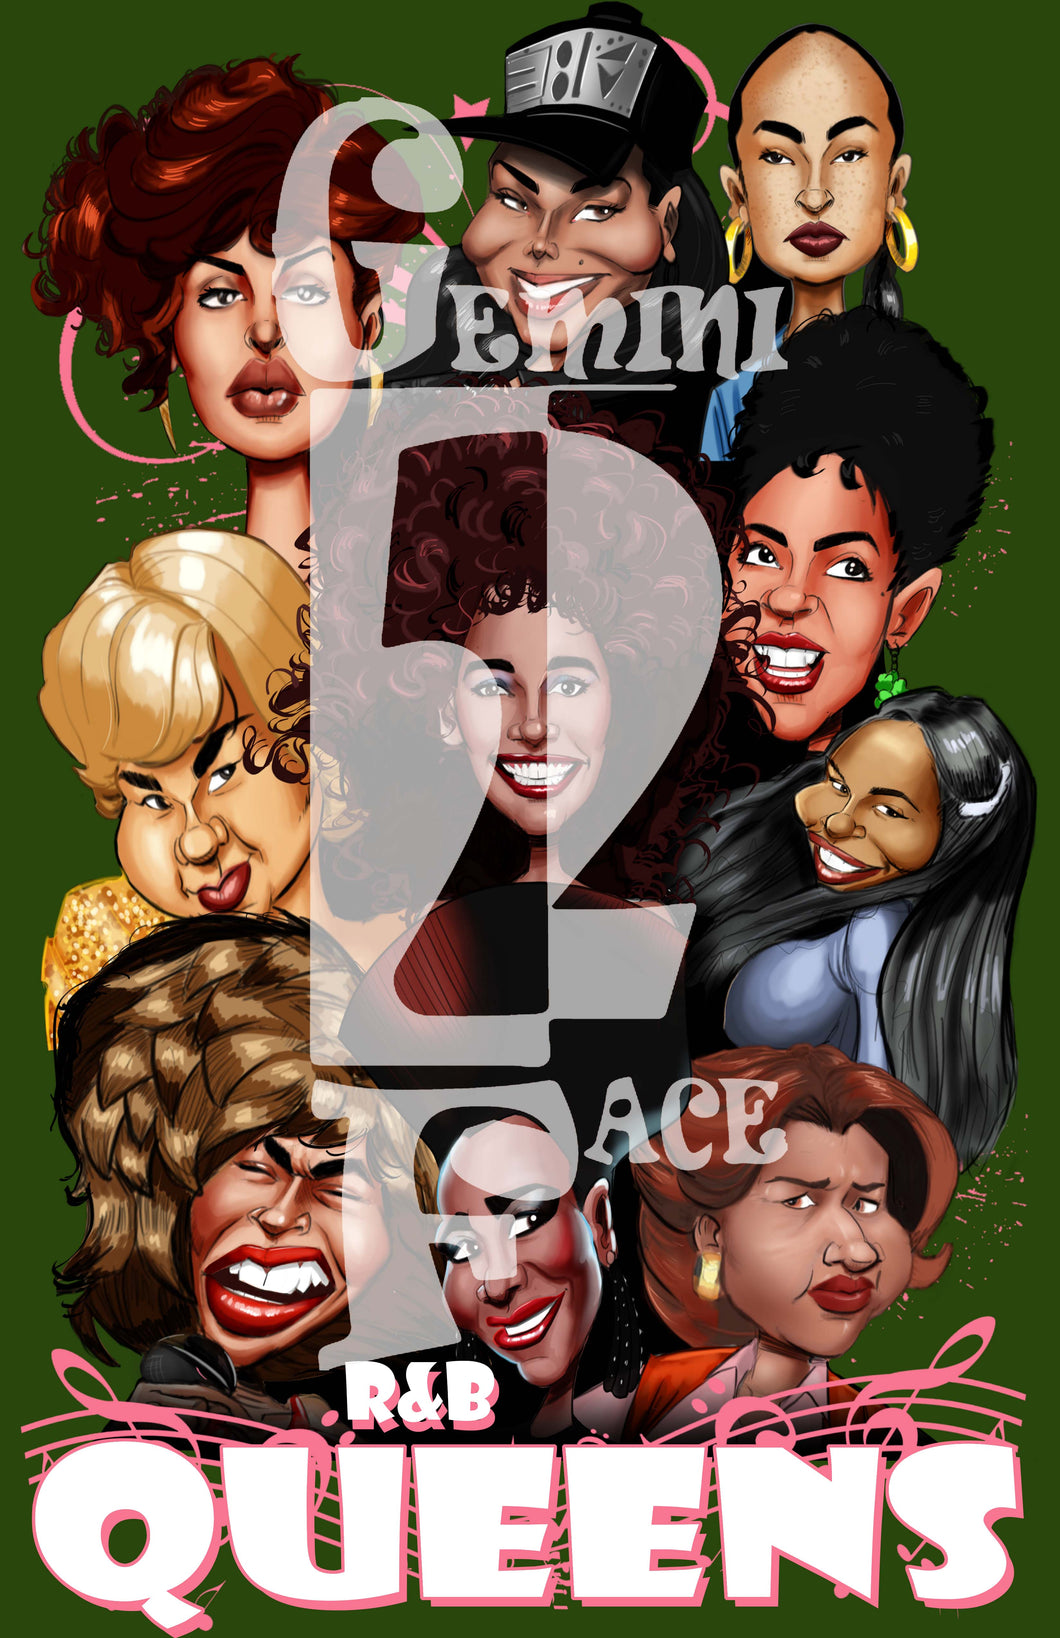 Queens of R&B w/words PNG PNG File Gemini2face Art E-Store 